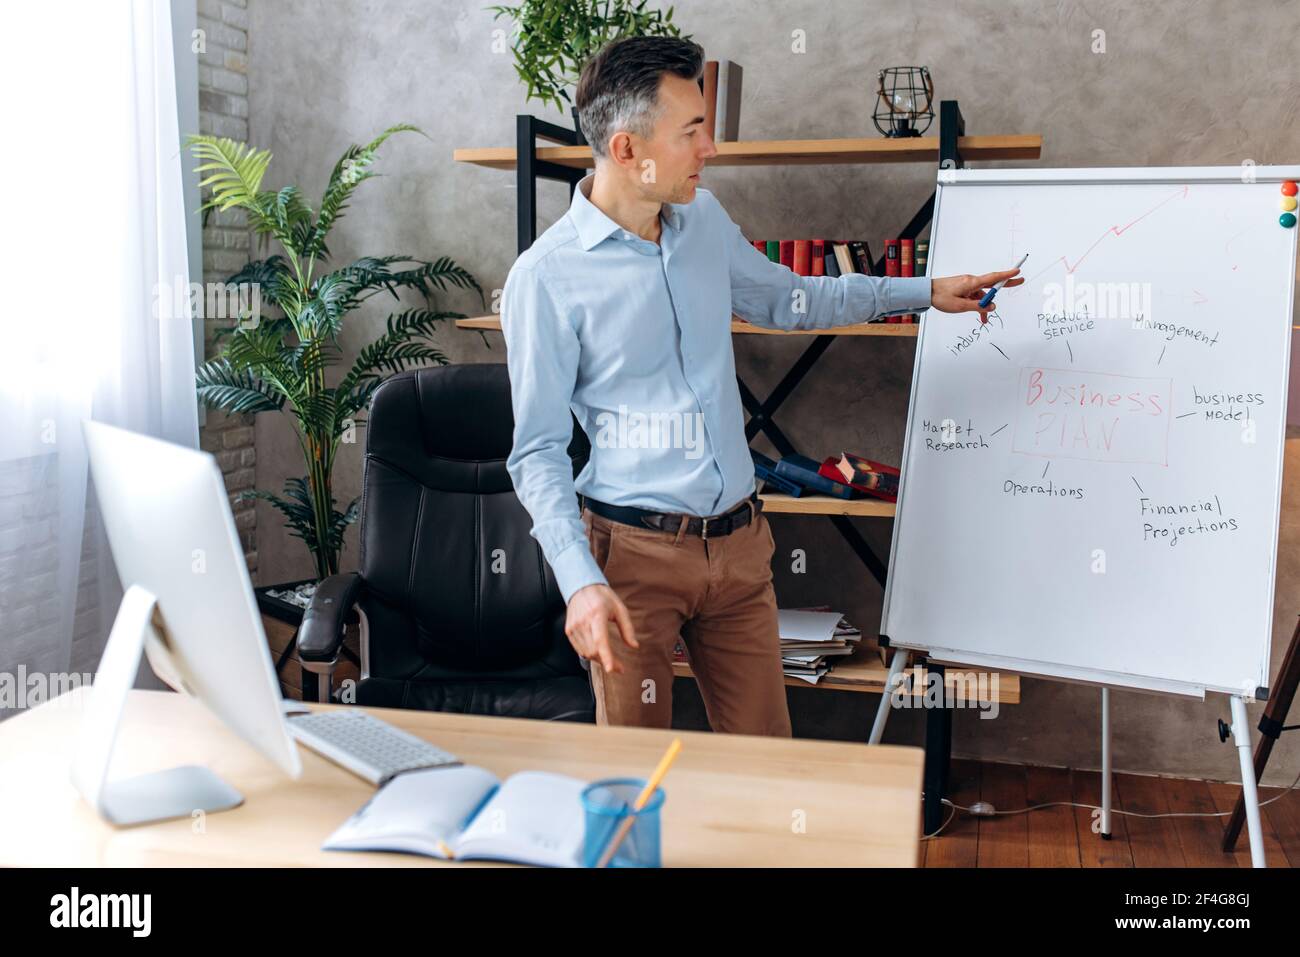 Successful confident caucasian middle aged businessman or manager, conducts online briefing for coworkers via video conference, shows a presentation about company business plan on a flipchart Stock Photo